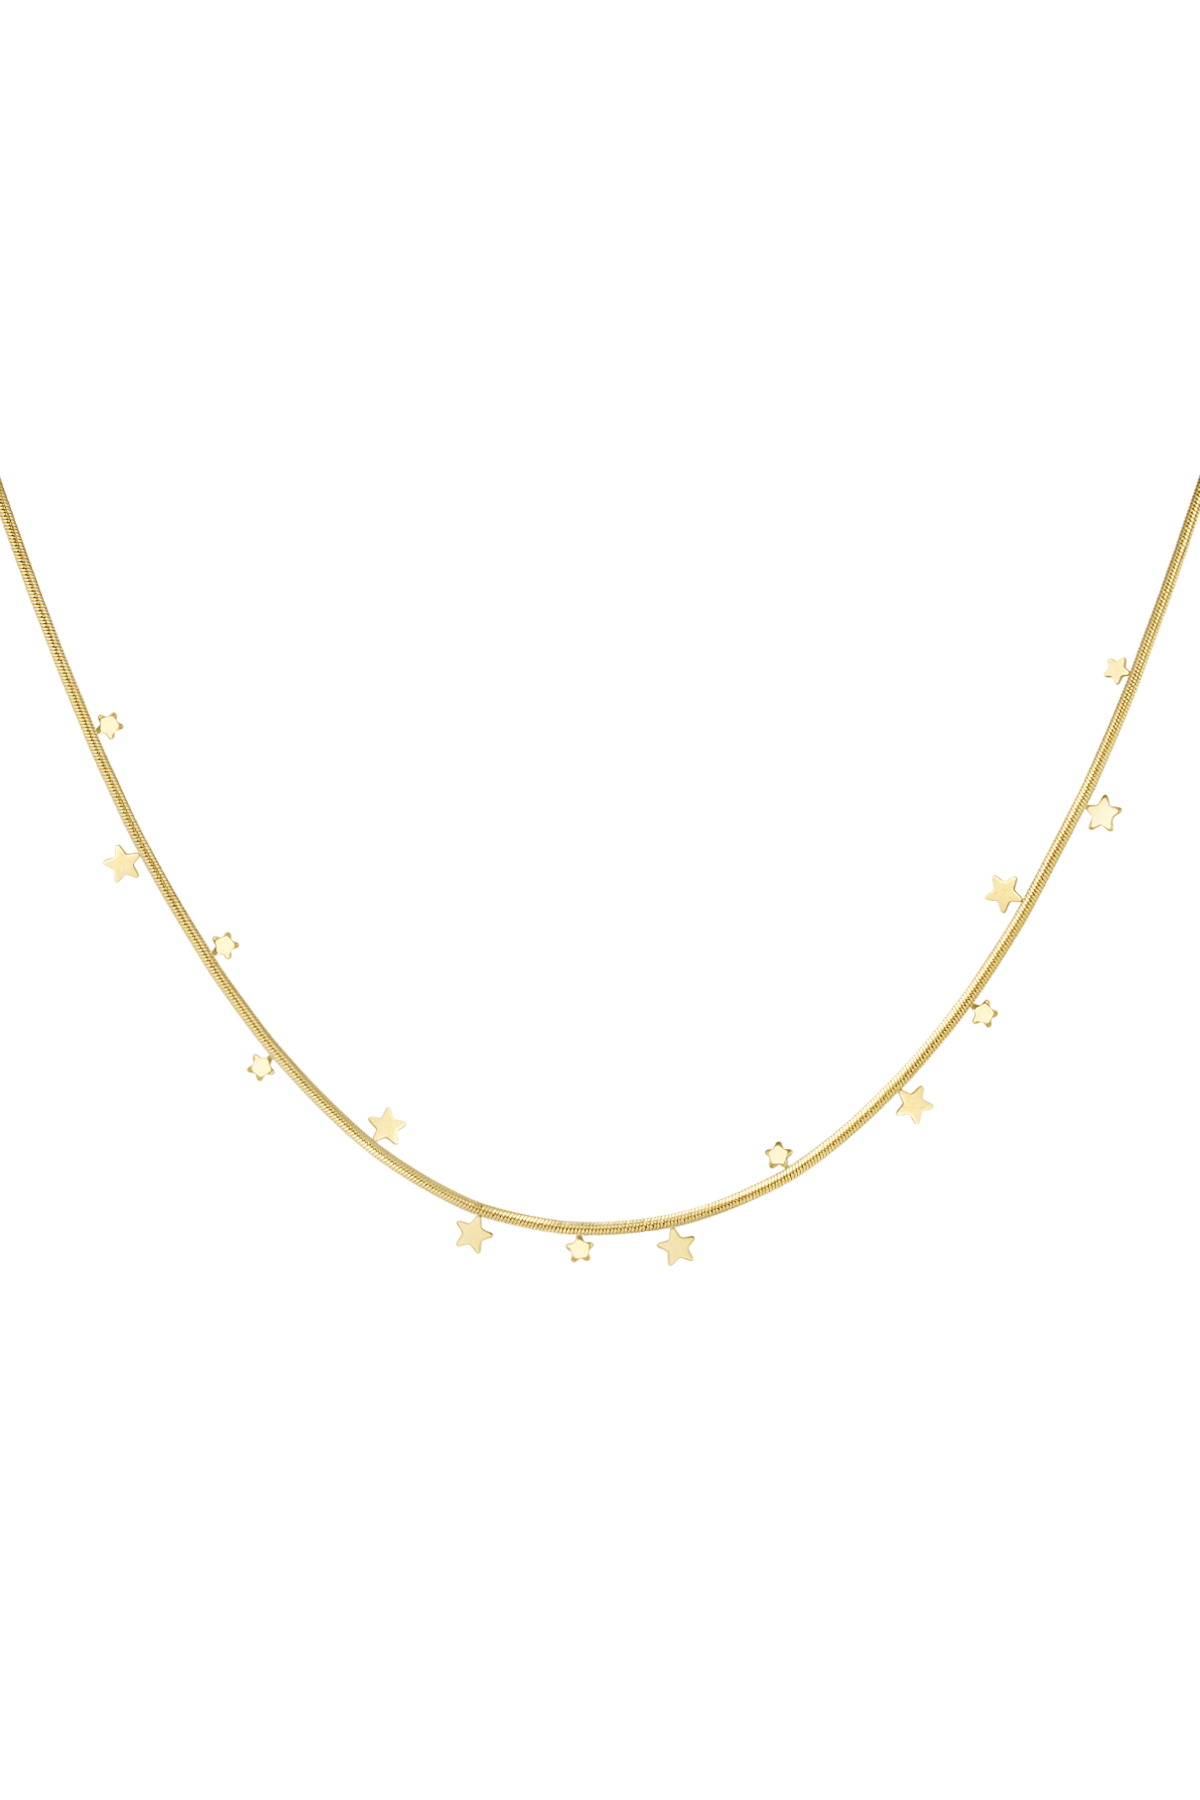 Necklace hanging stars - gold 